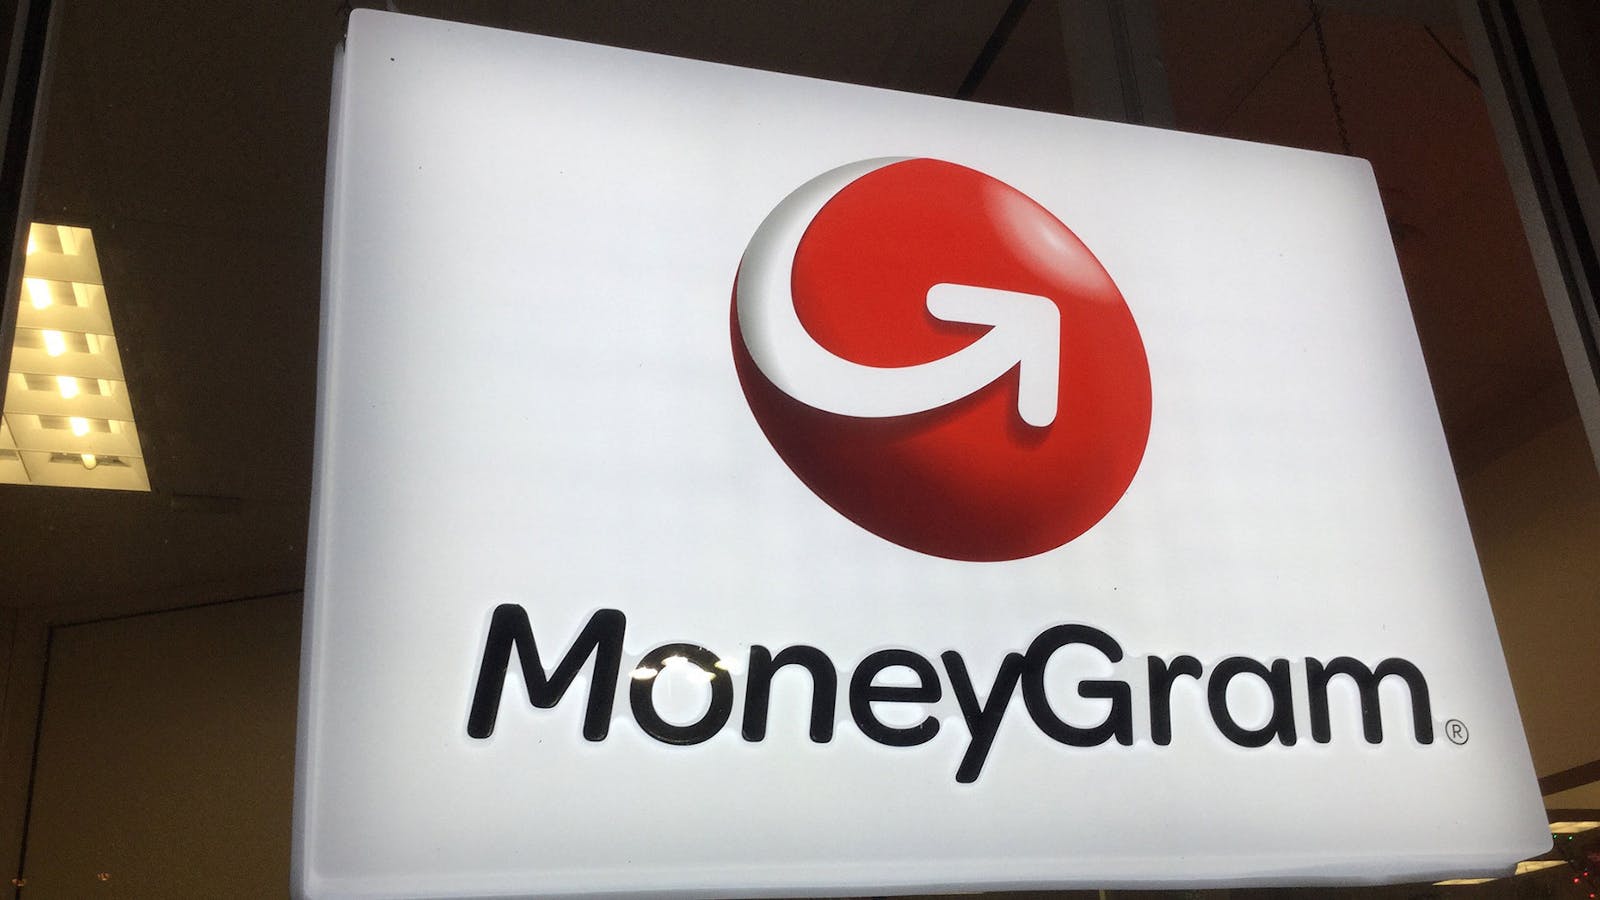 Ant Financial's proposed acquisition of MoneyGram has run into resistance from U.S. authorities. Photo: Mike Mozart/Flickr